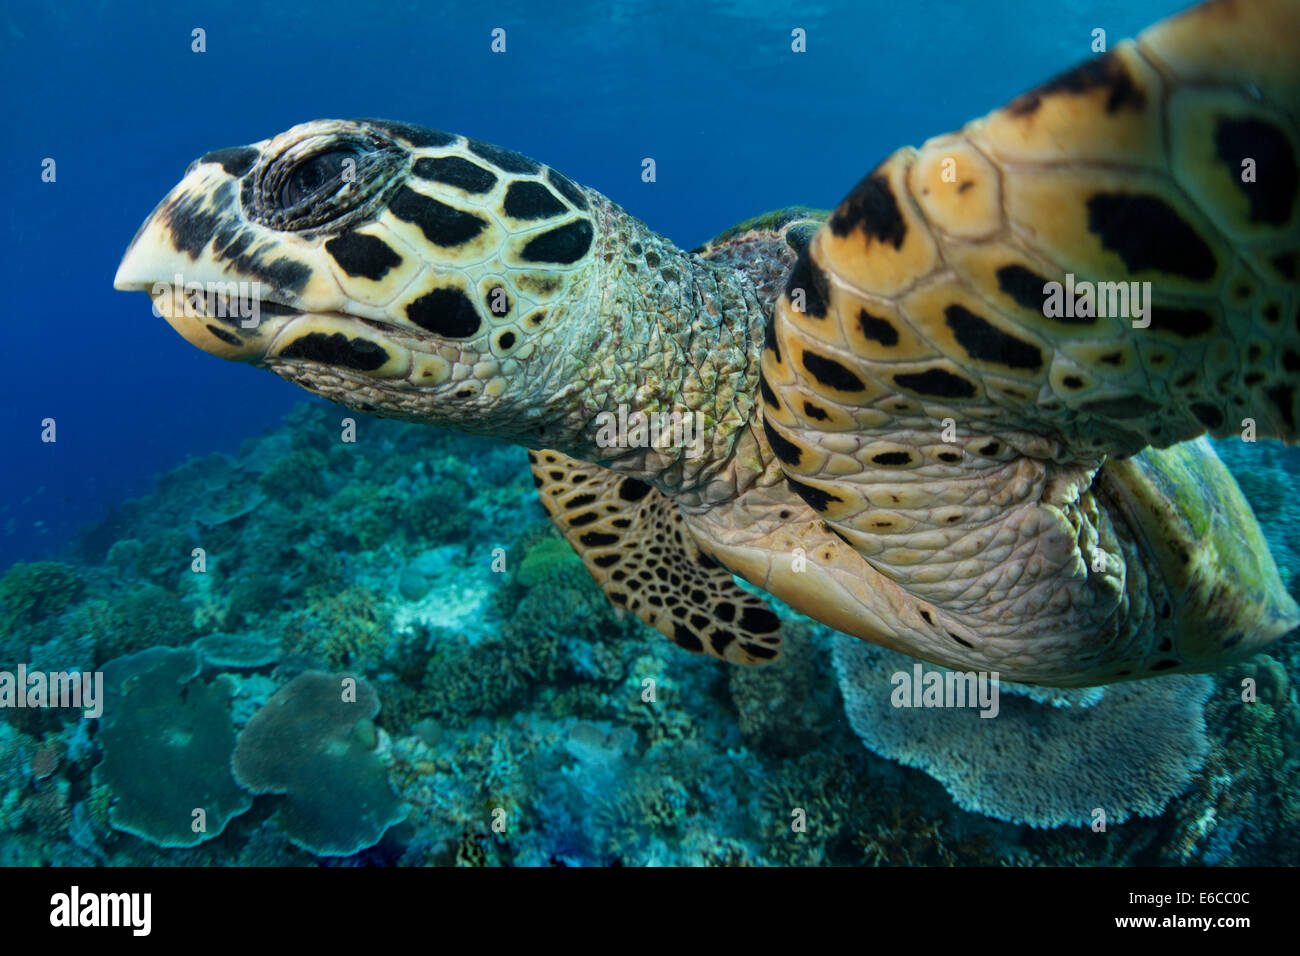 Close-up of face and eye of Hawksbill turtle. Stock Photo